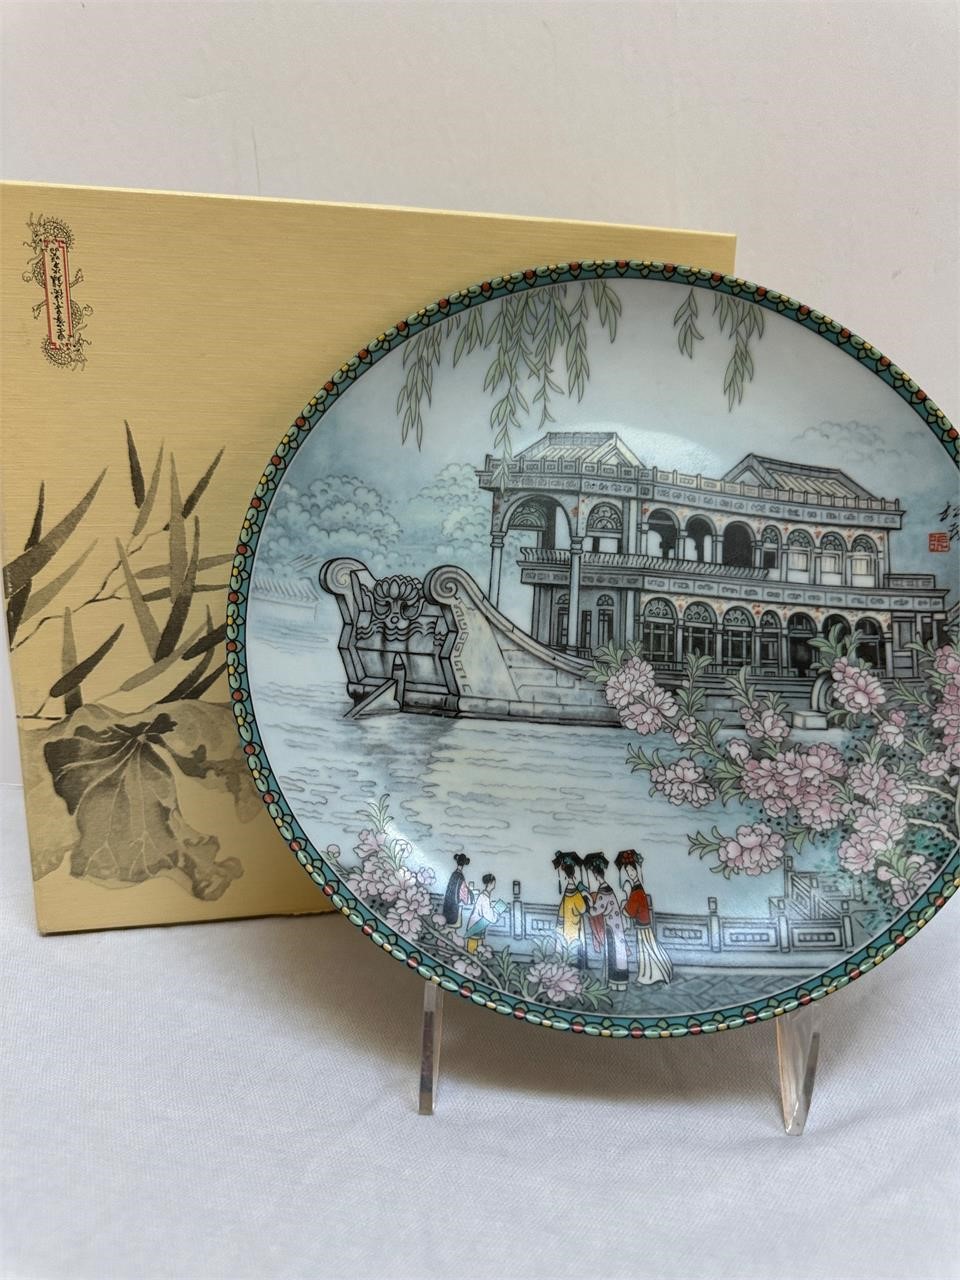 The Marble Boat Plate